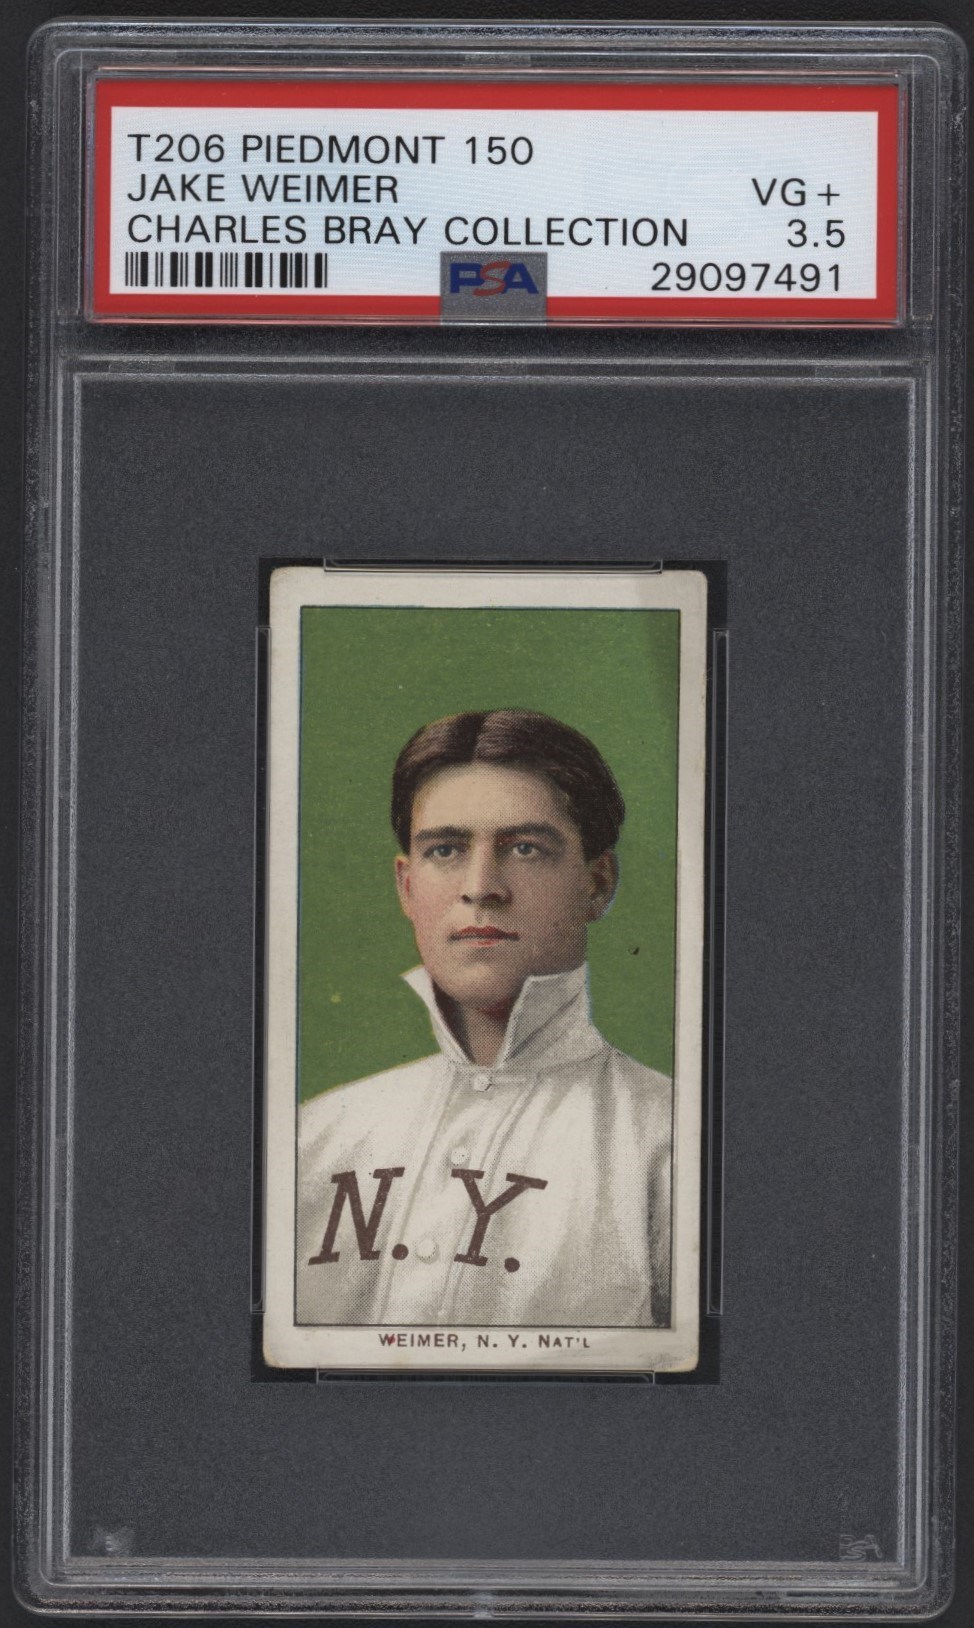 Baseball and Trading Cards - T206 Piedmont 150 Jake Weimer PSA 3.5 From the Charles Bray Collection